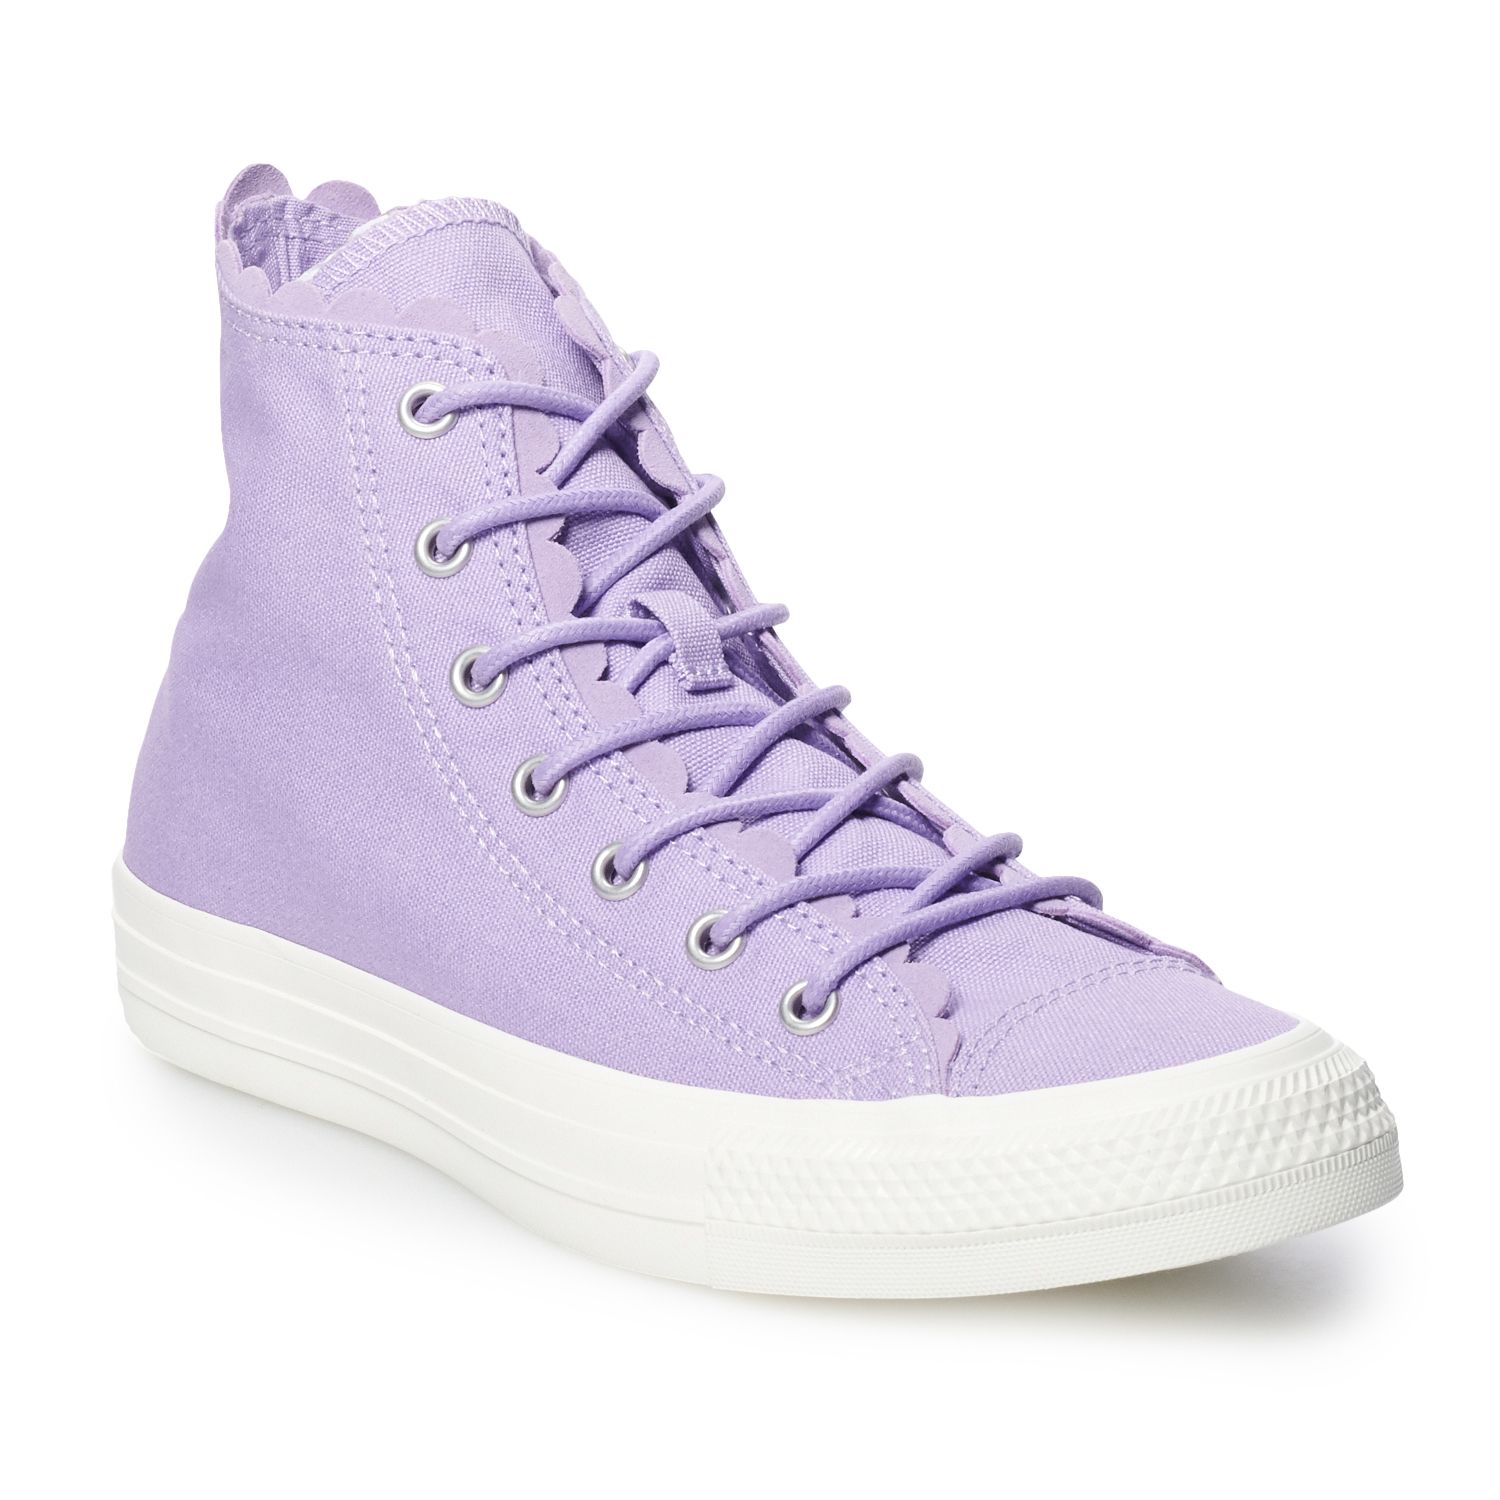 converse white frilly